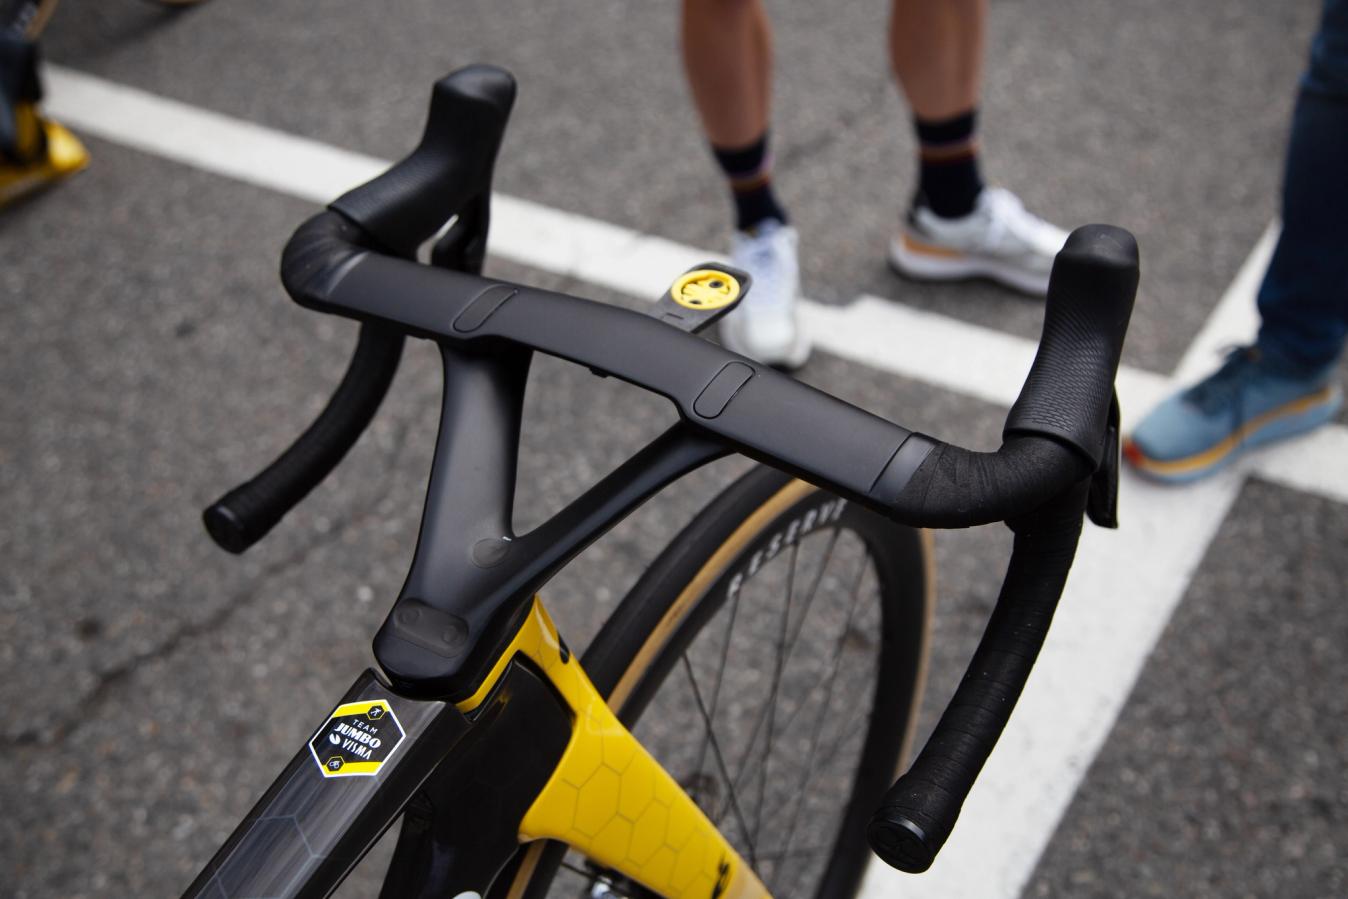 Like the frame, the handlebars stand out thanks to the unique stem